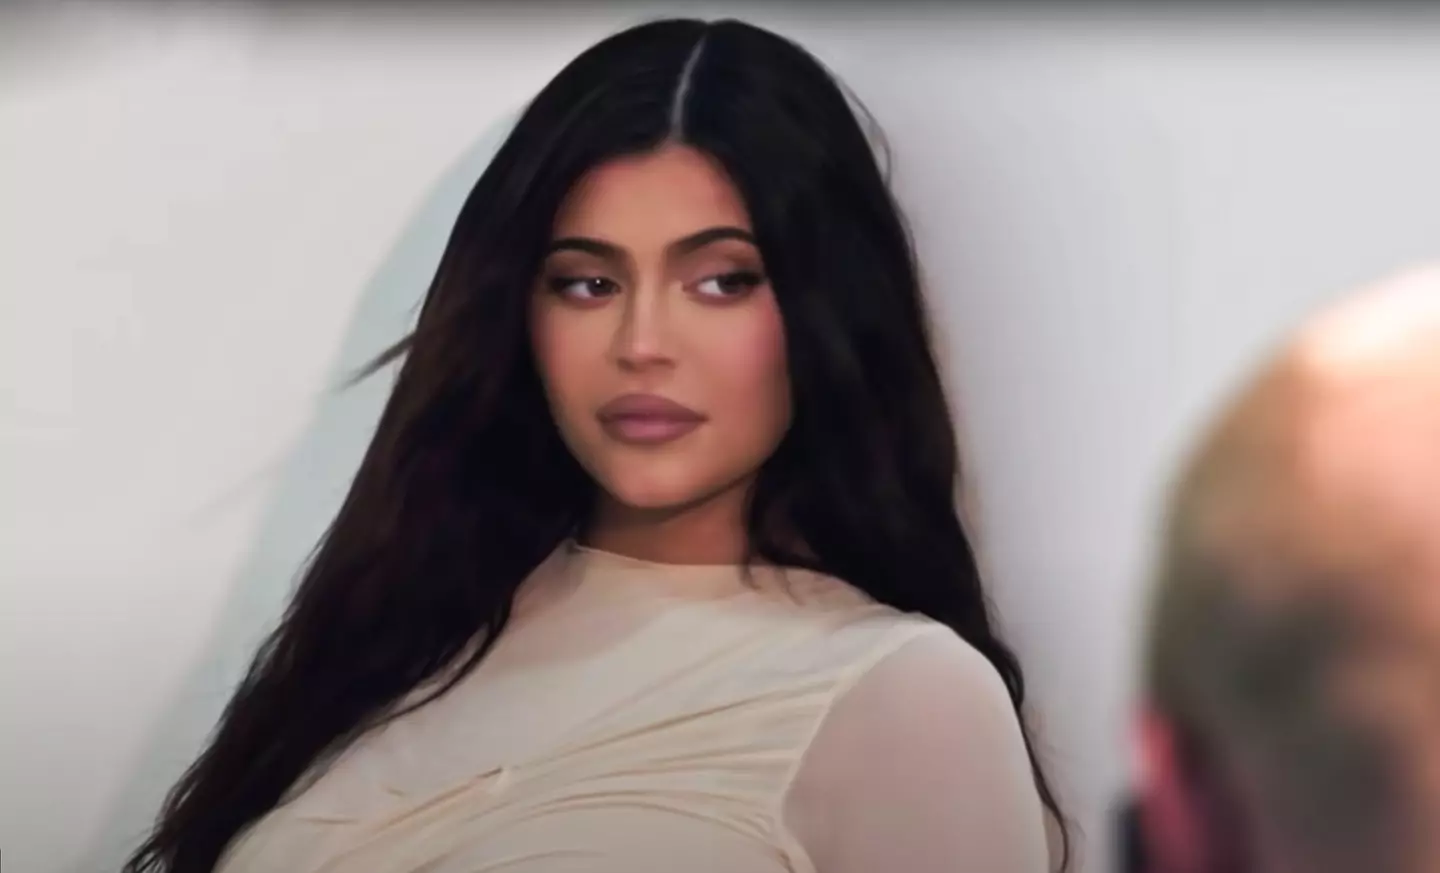 Kylie Jenner has faced criticism online for taking a 30-minute flight on her private jet.